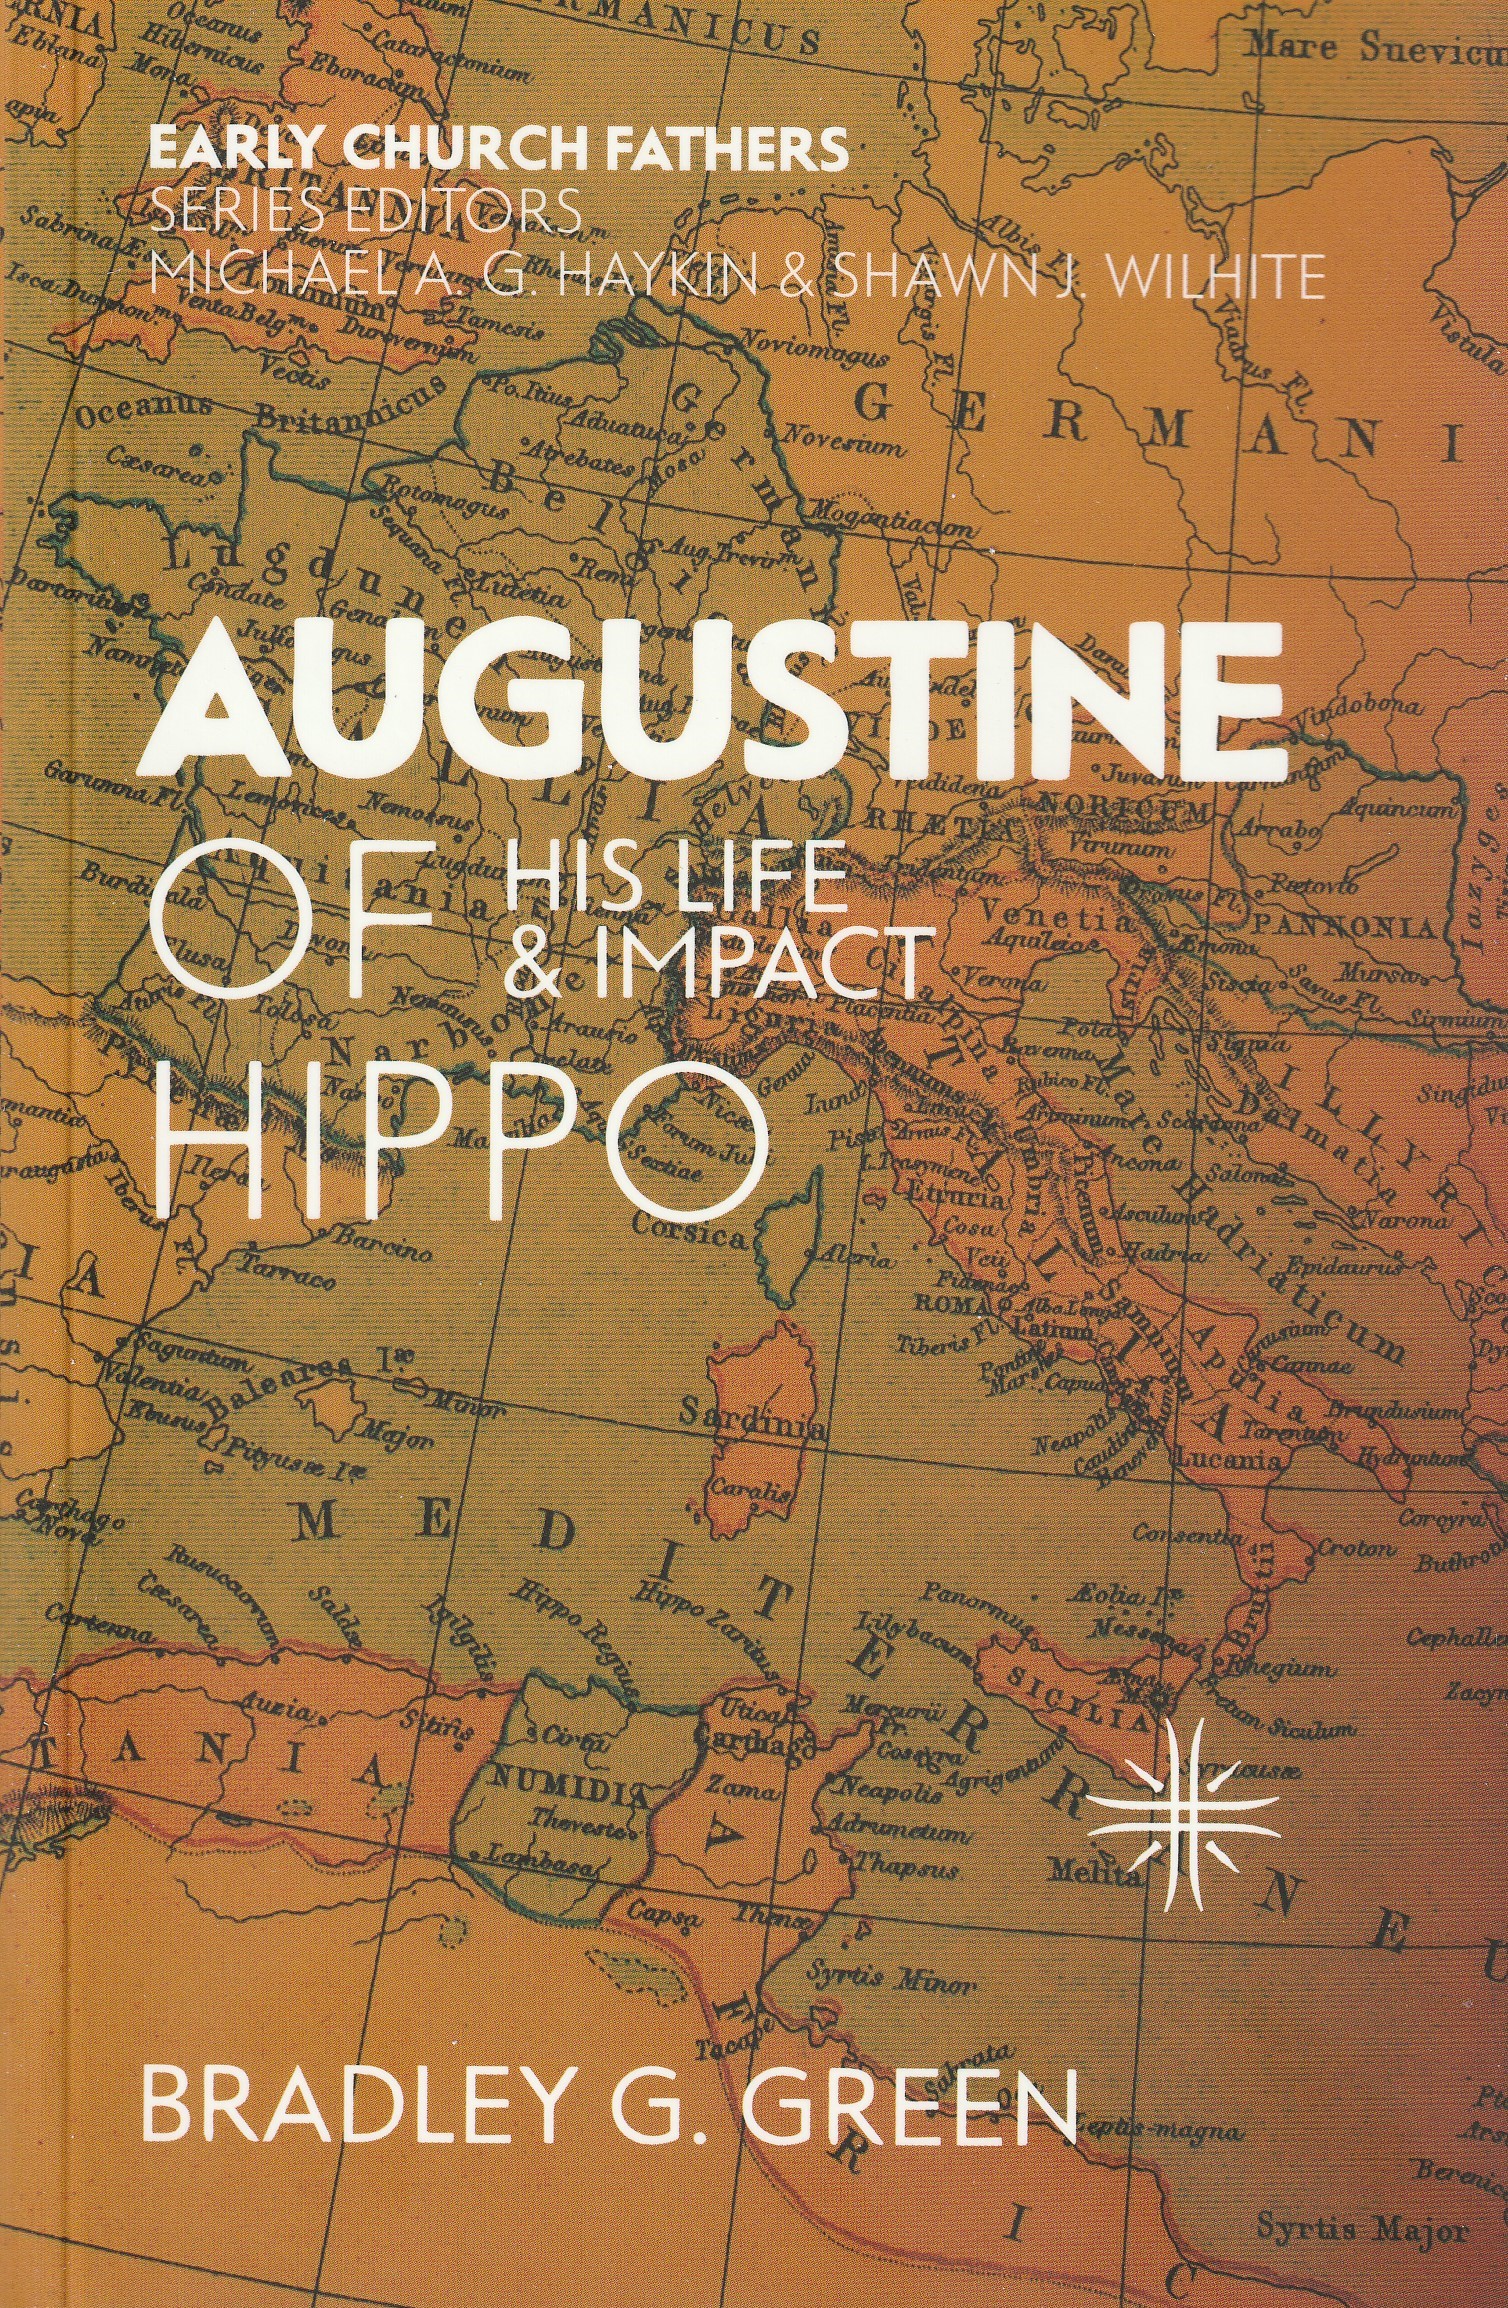 Augustine of Hippo: His Life and Impact